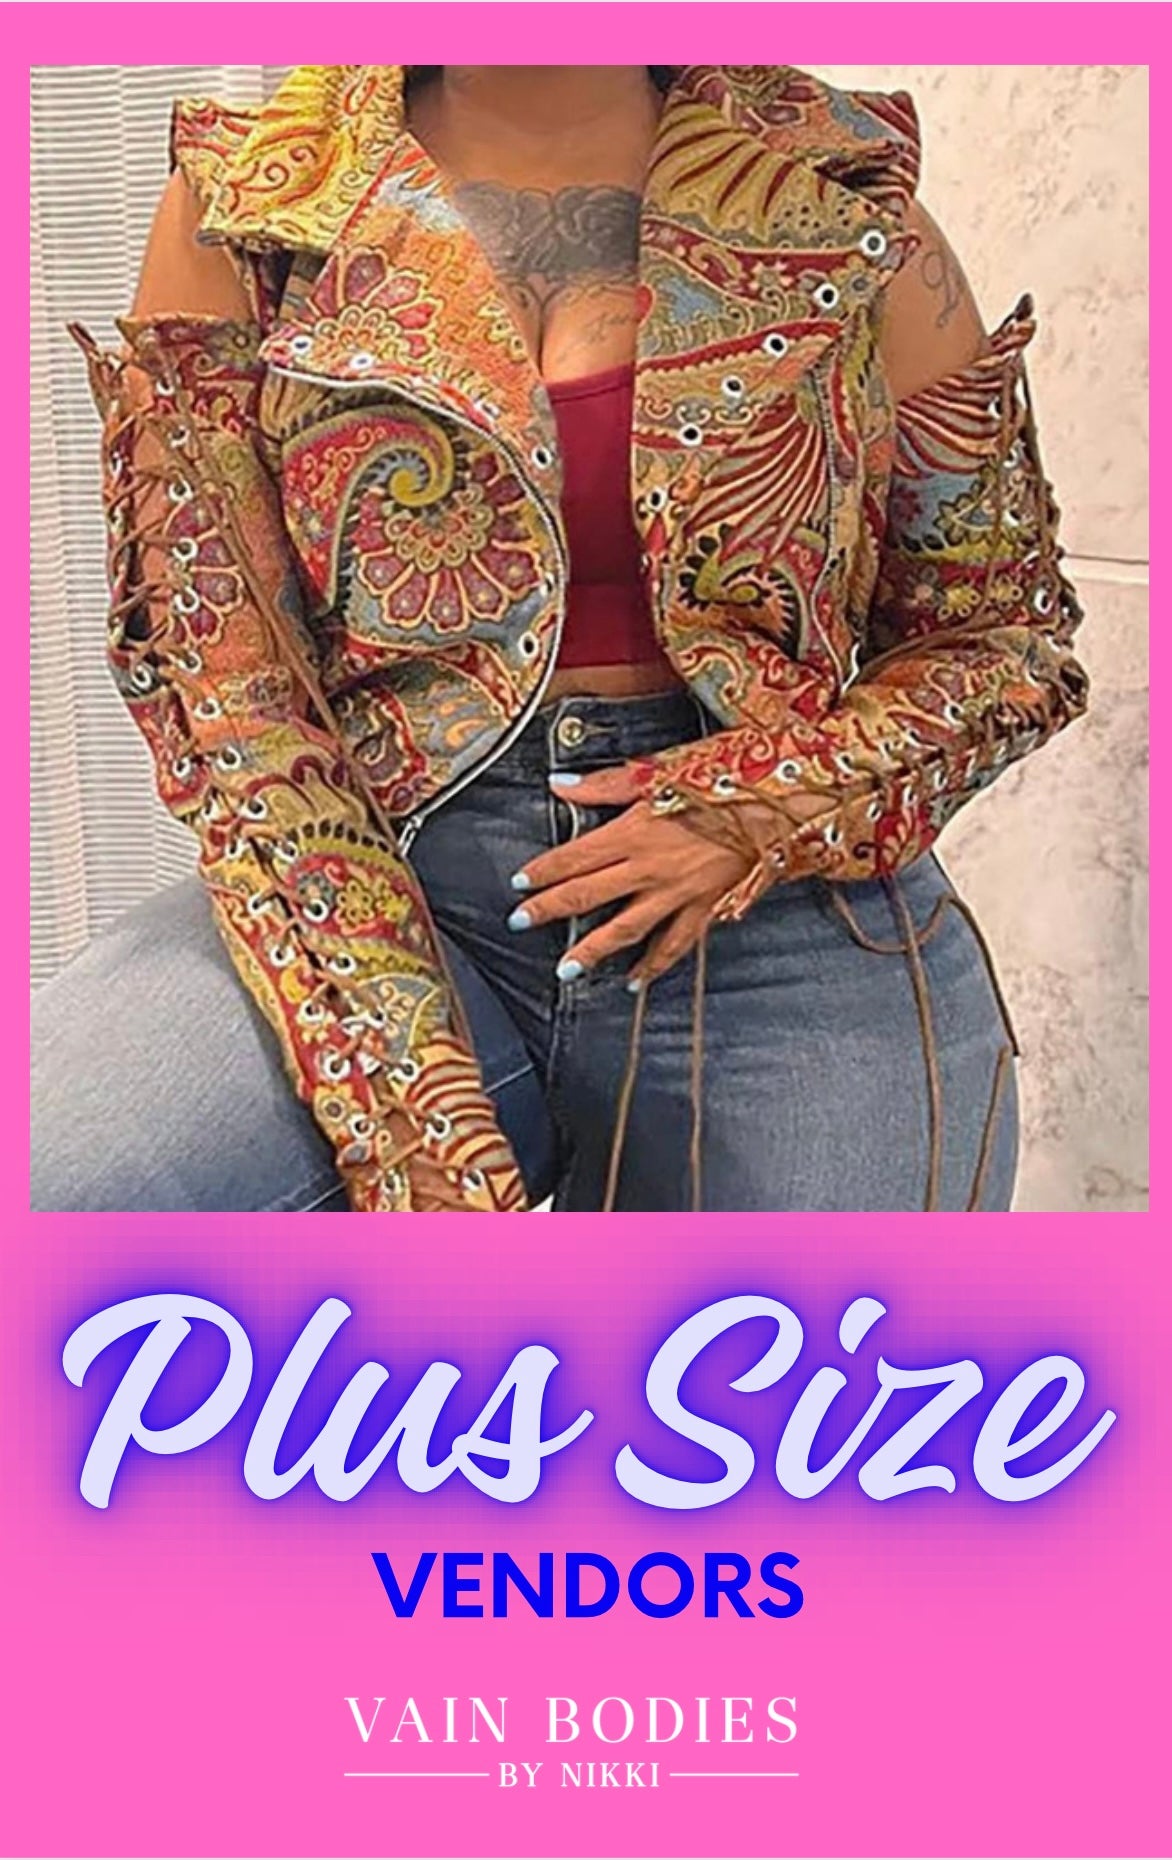 Plus size clothing vendors {With Resell Rights }